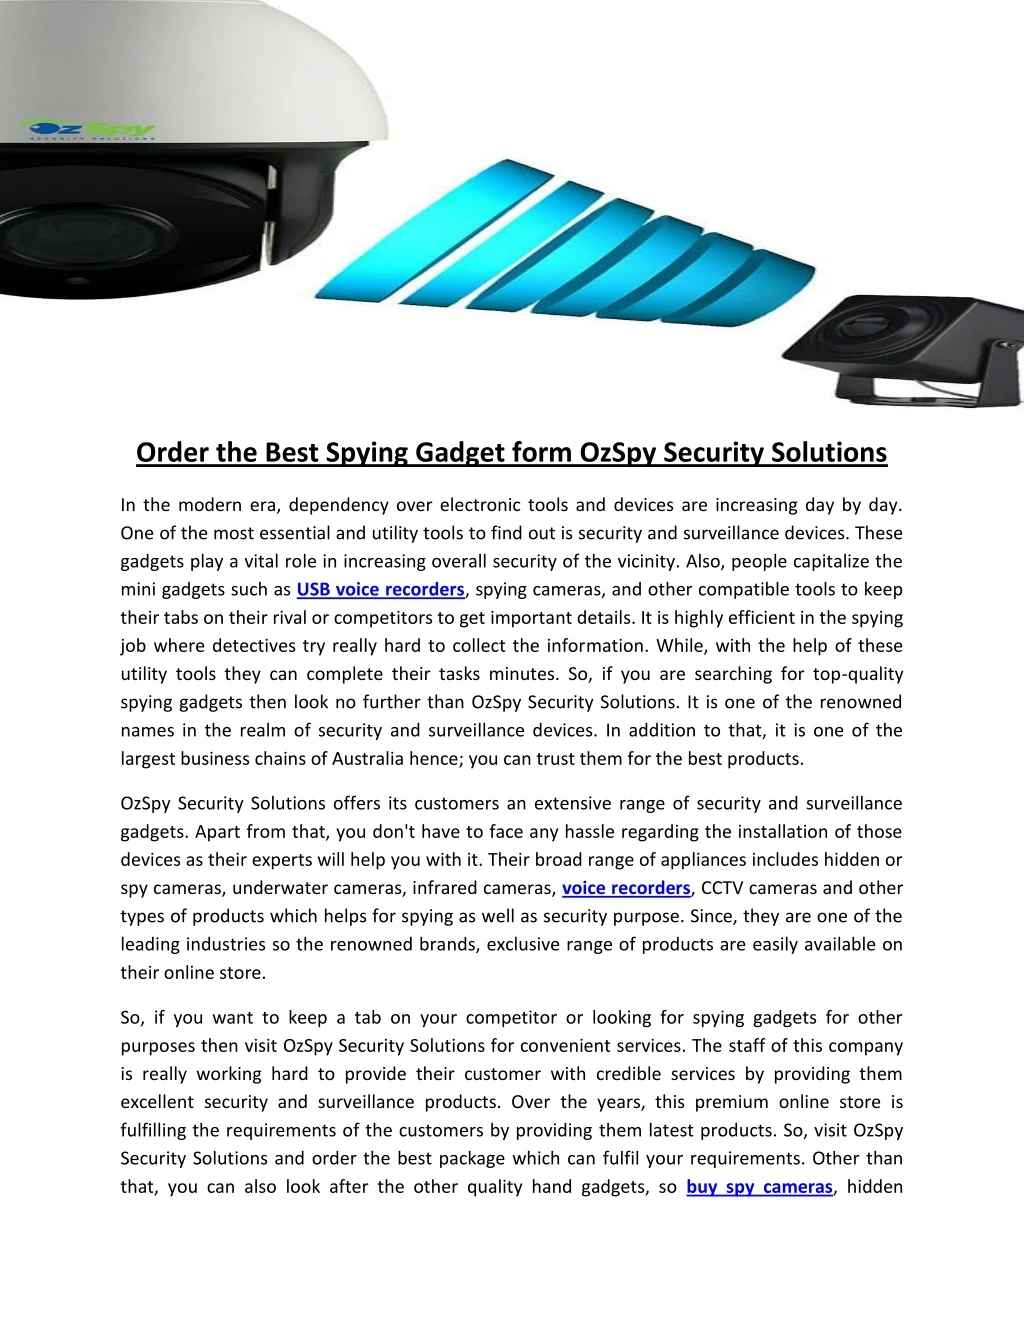 order the best spying gadget form ozspy security